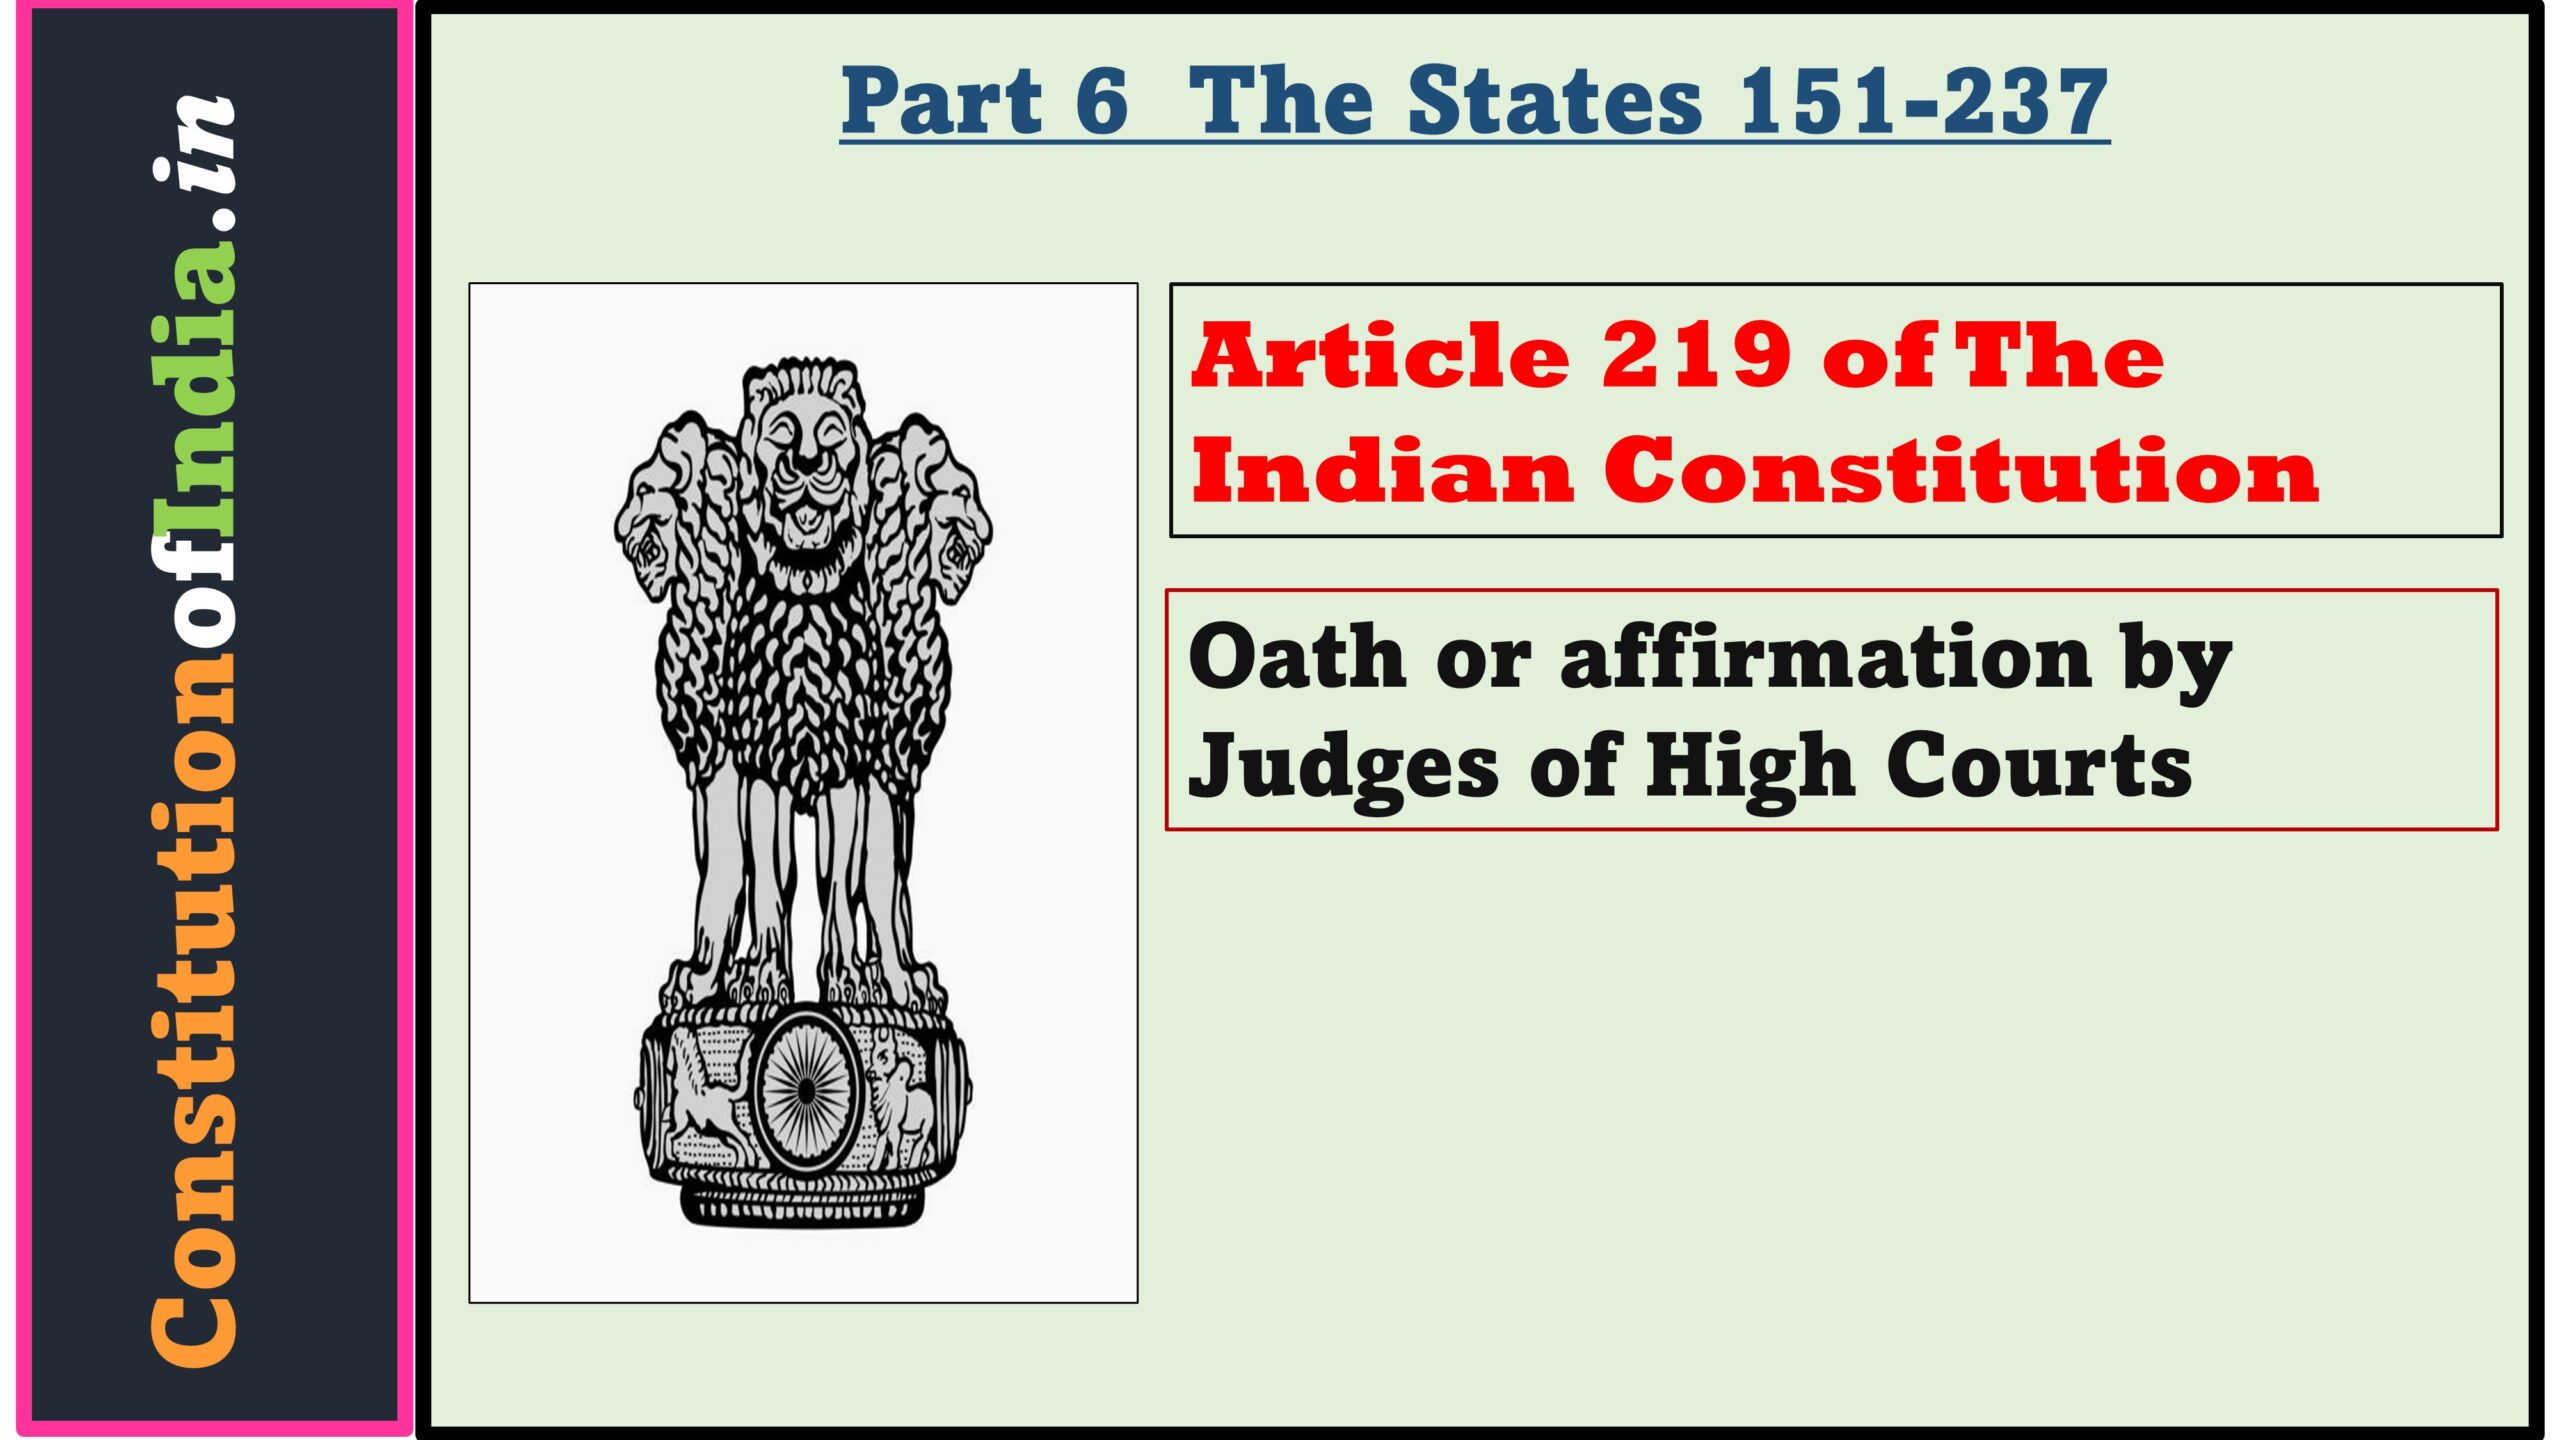 Article 219 of The Indian Constitution